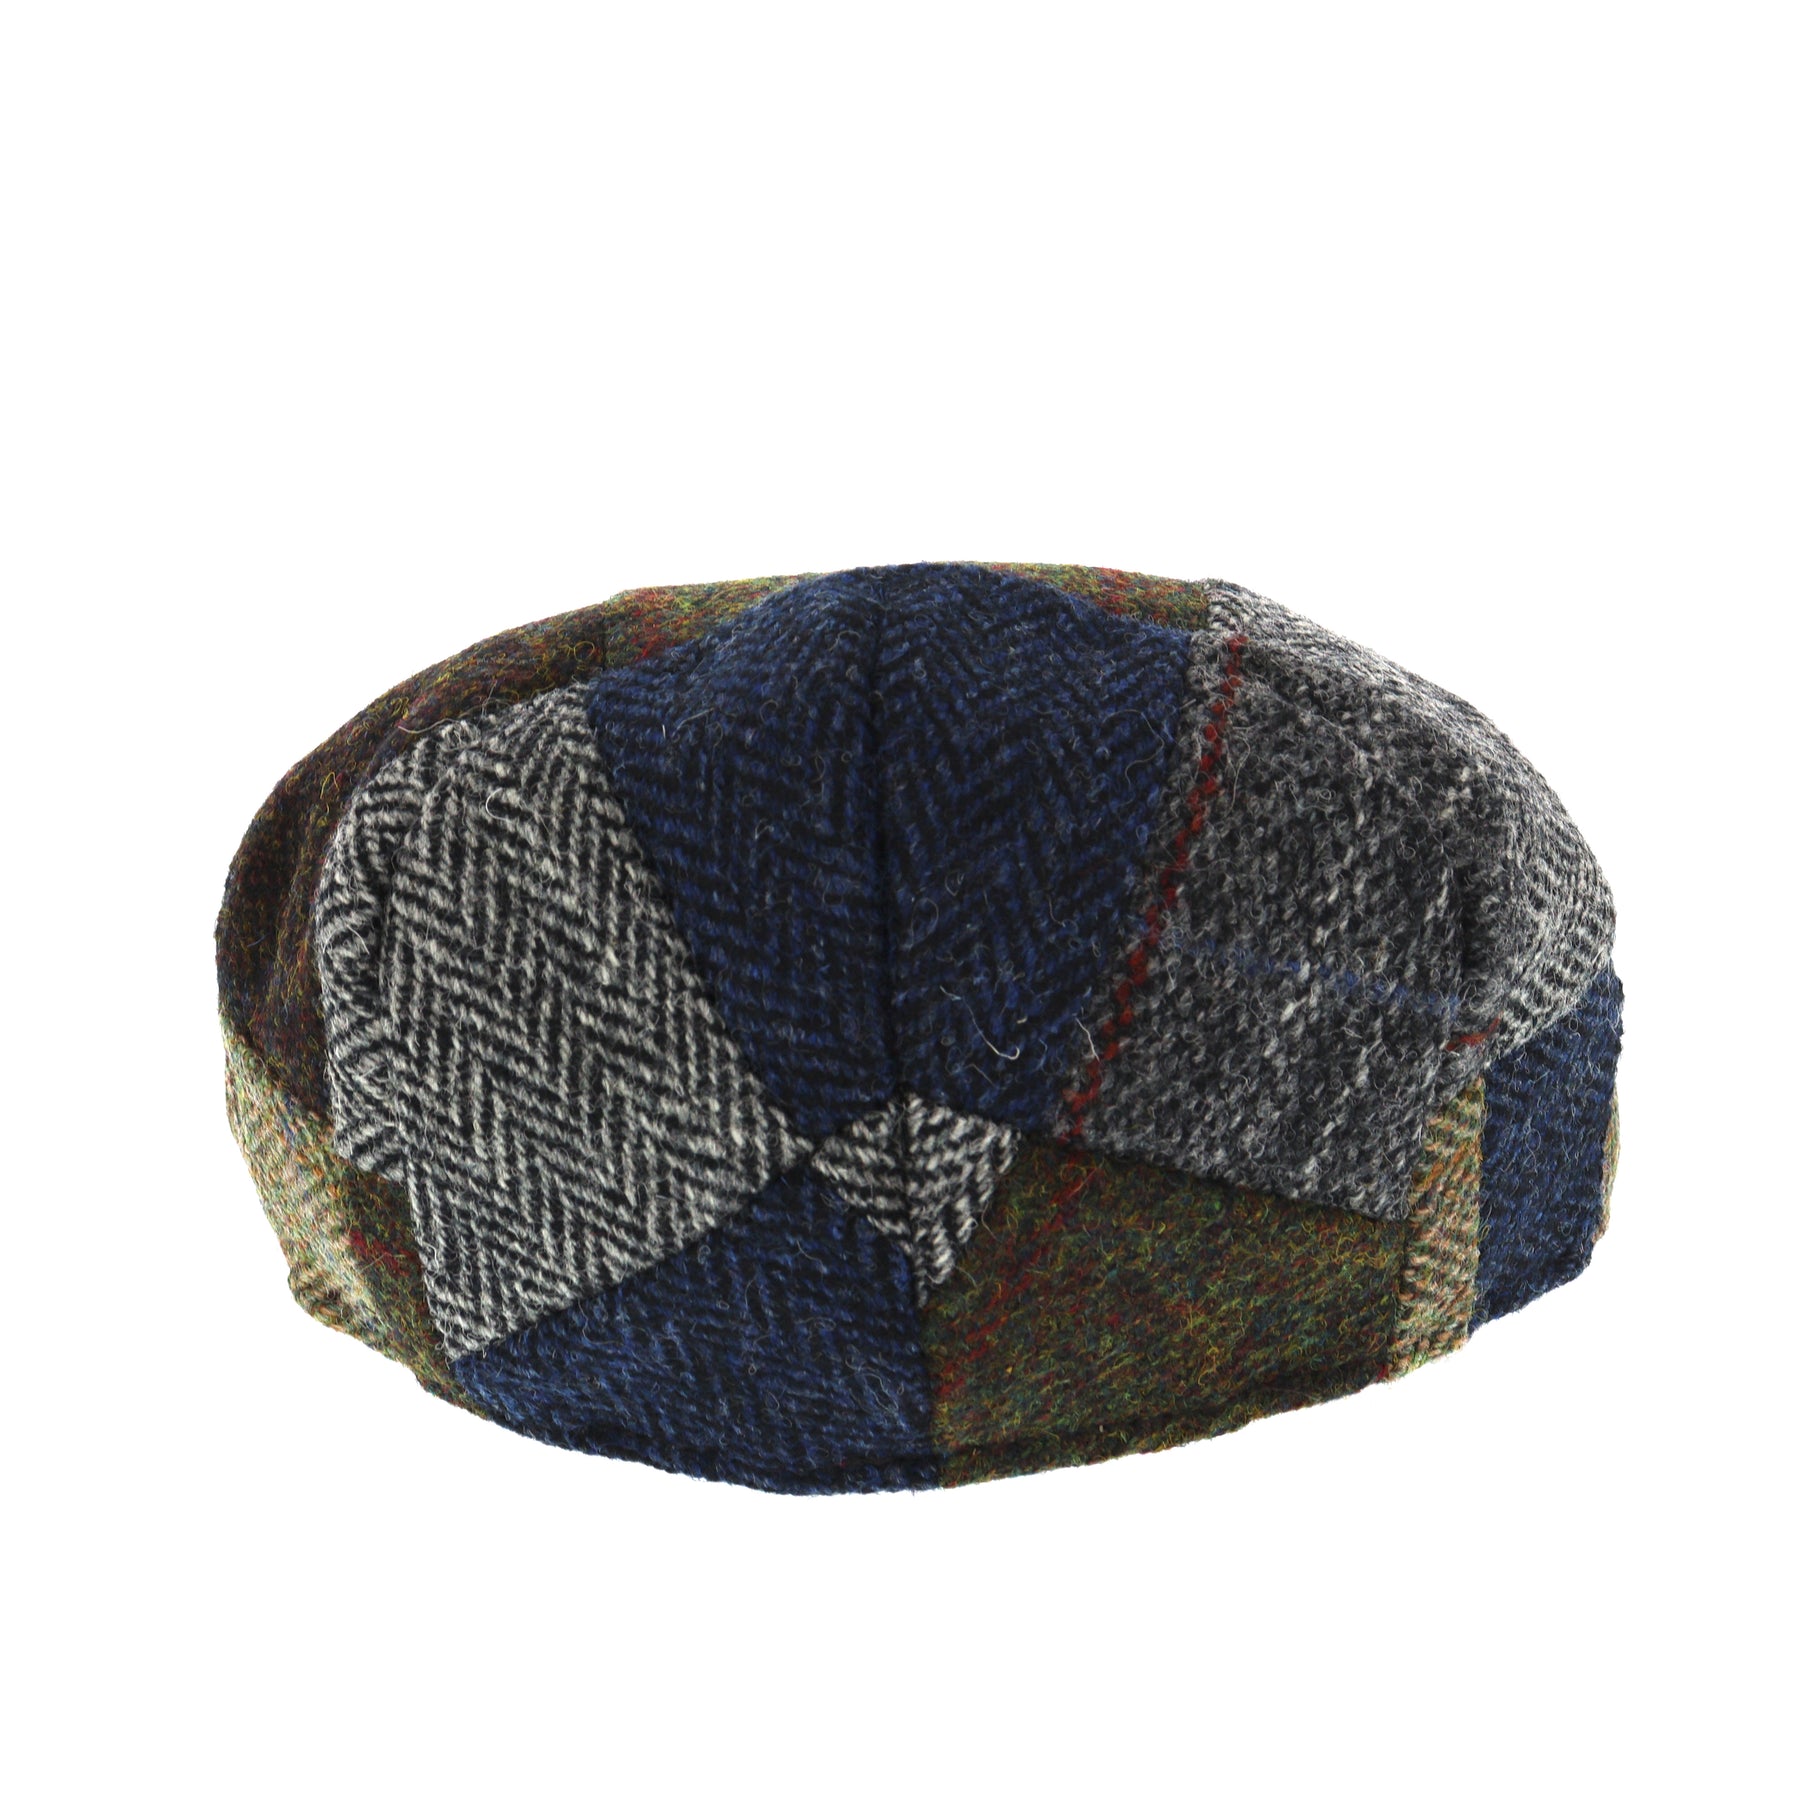 Glen Appin Harris Tweed Patchwork Wool Country Flat Cap – The Hat Company